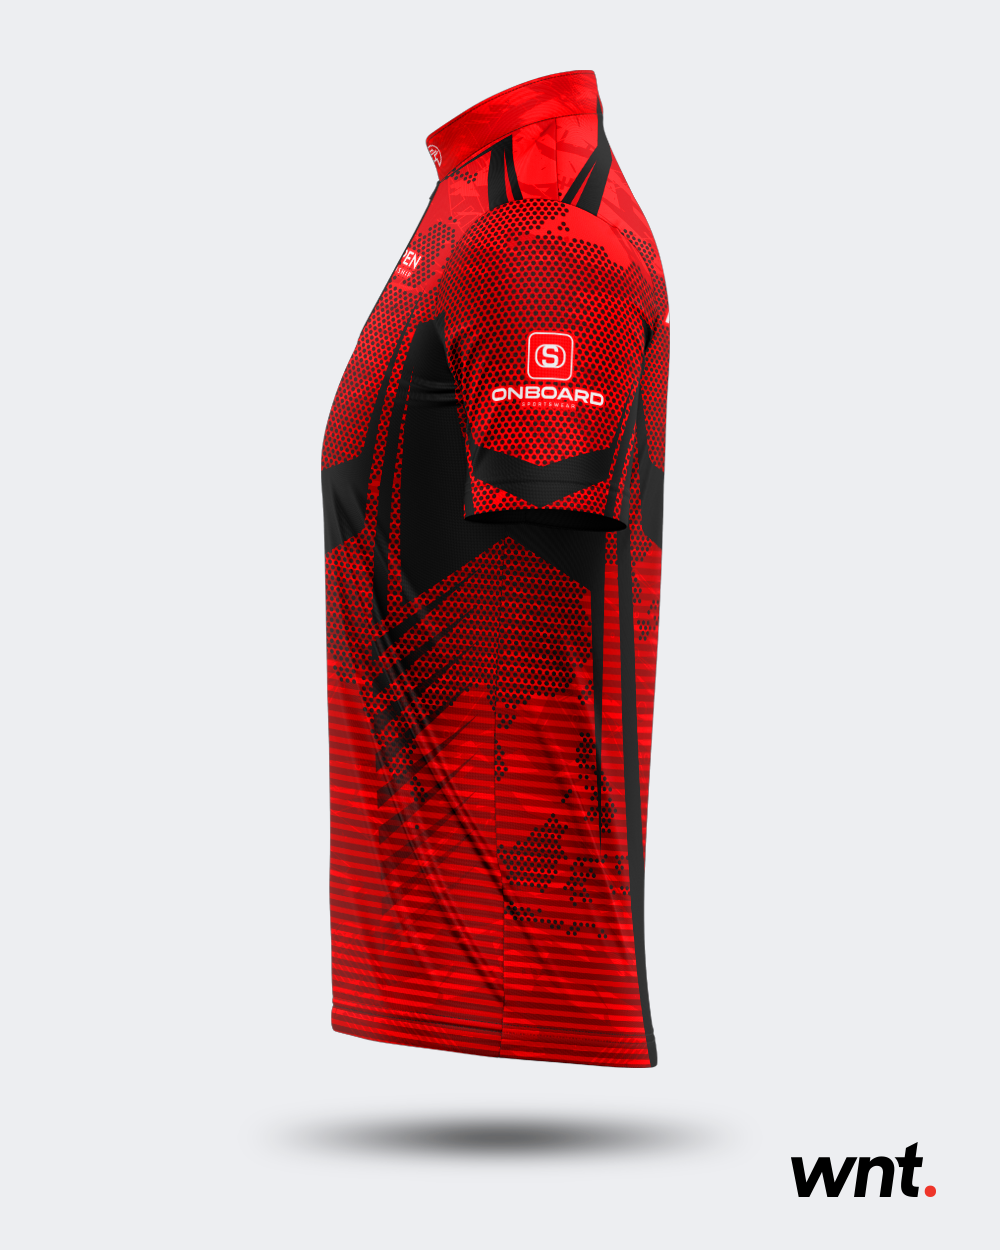 Official Hanoi Open Jersey 2023 - Red